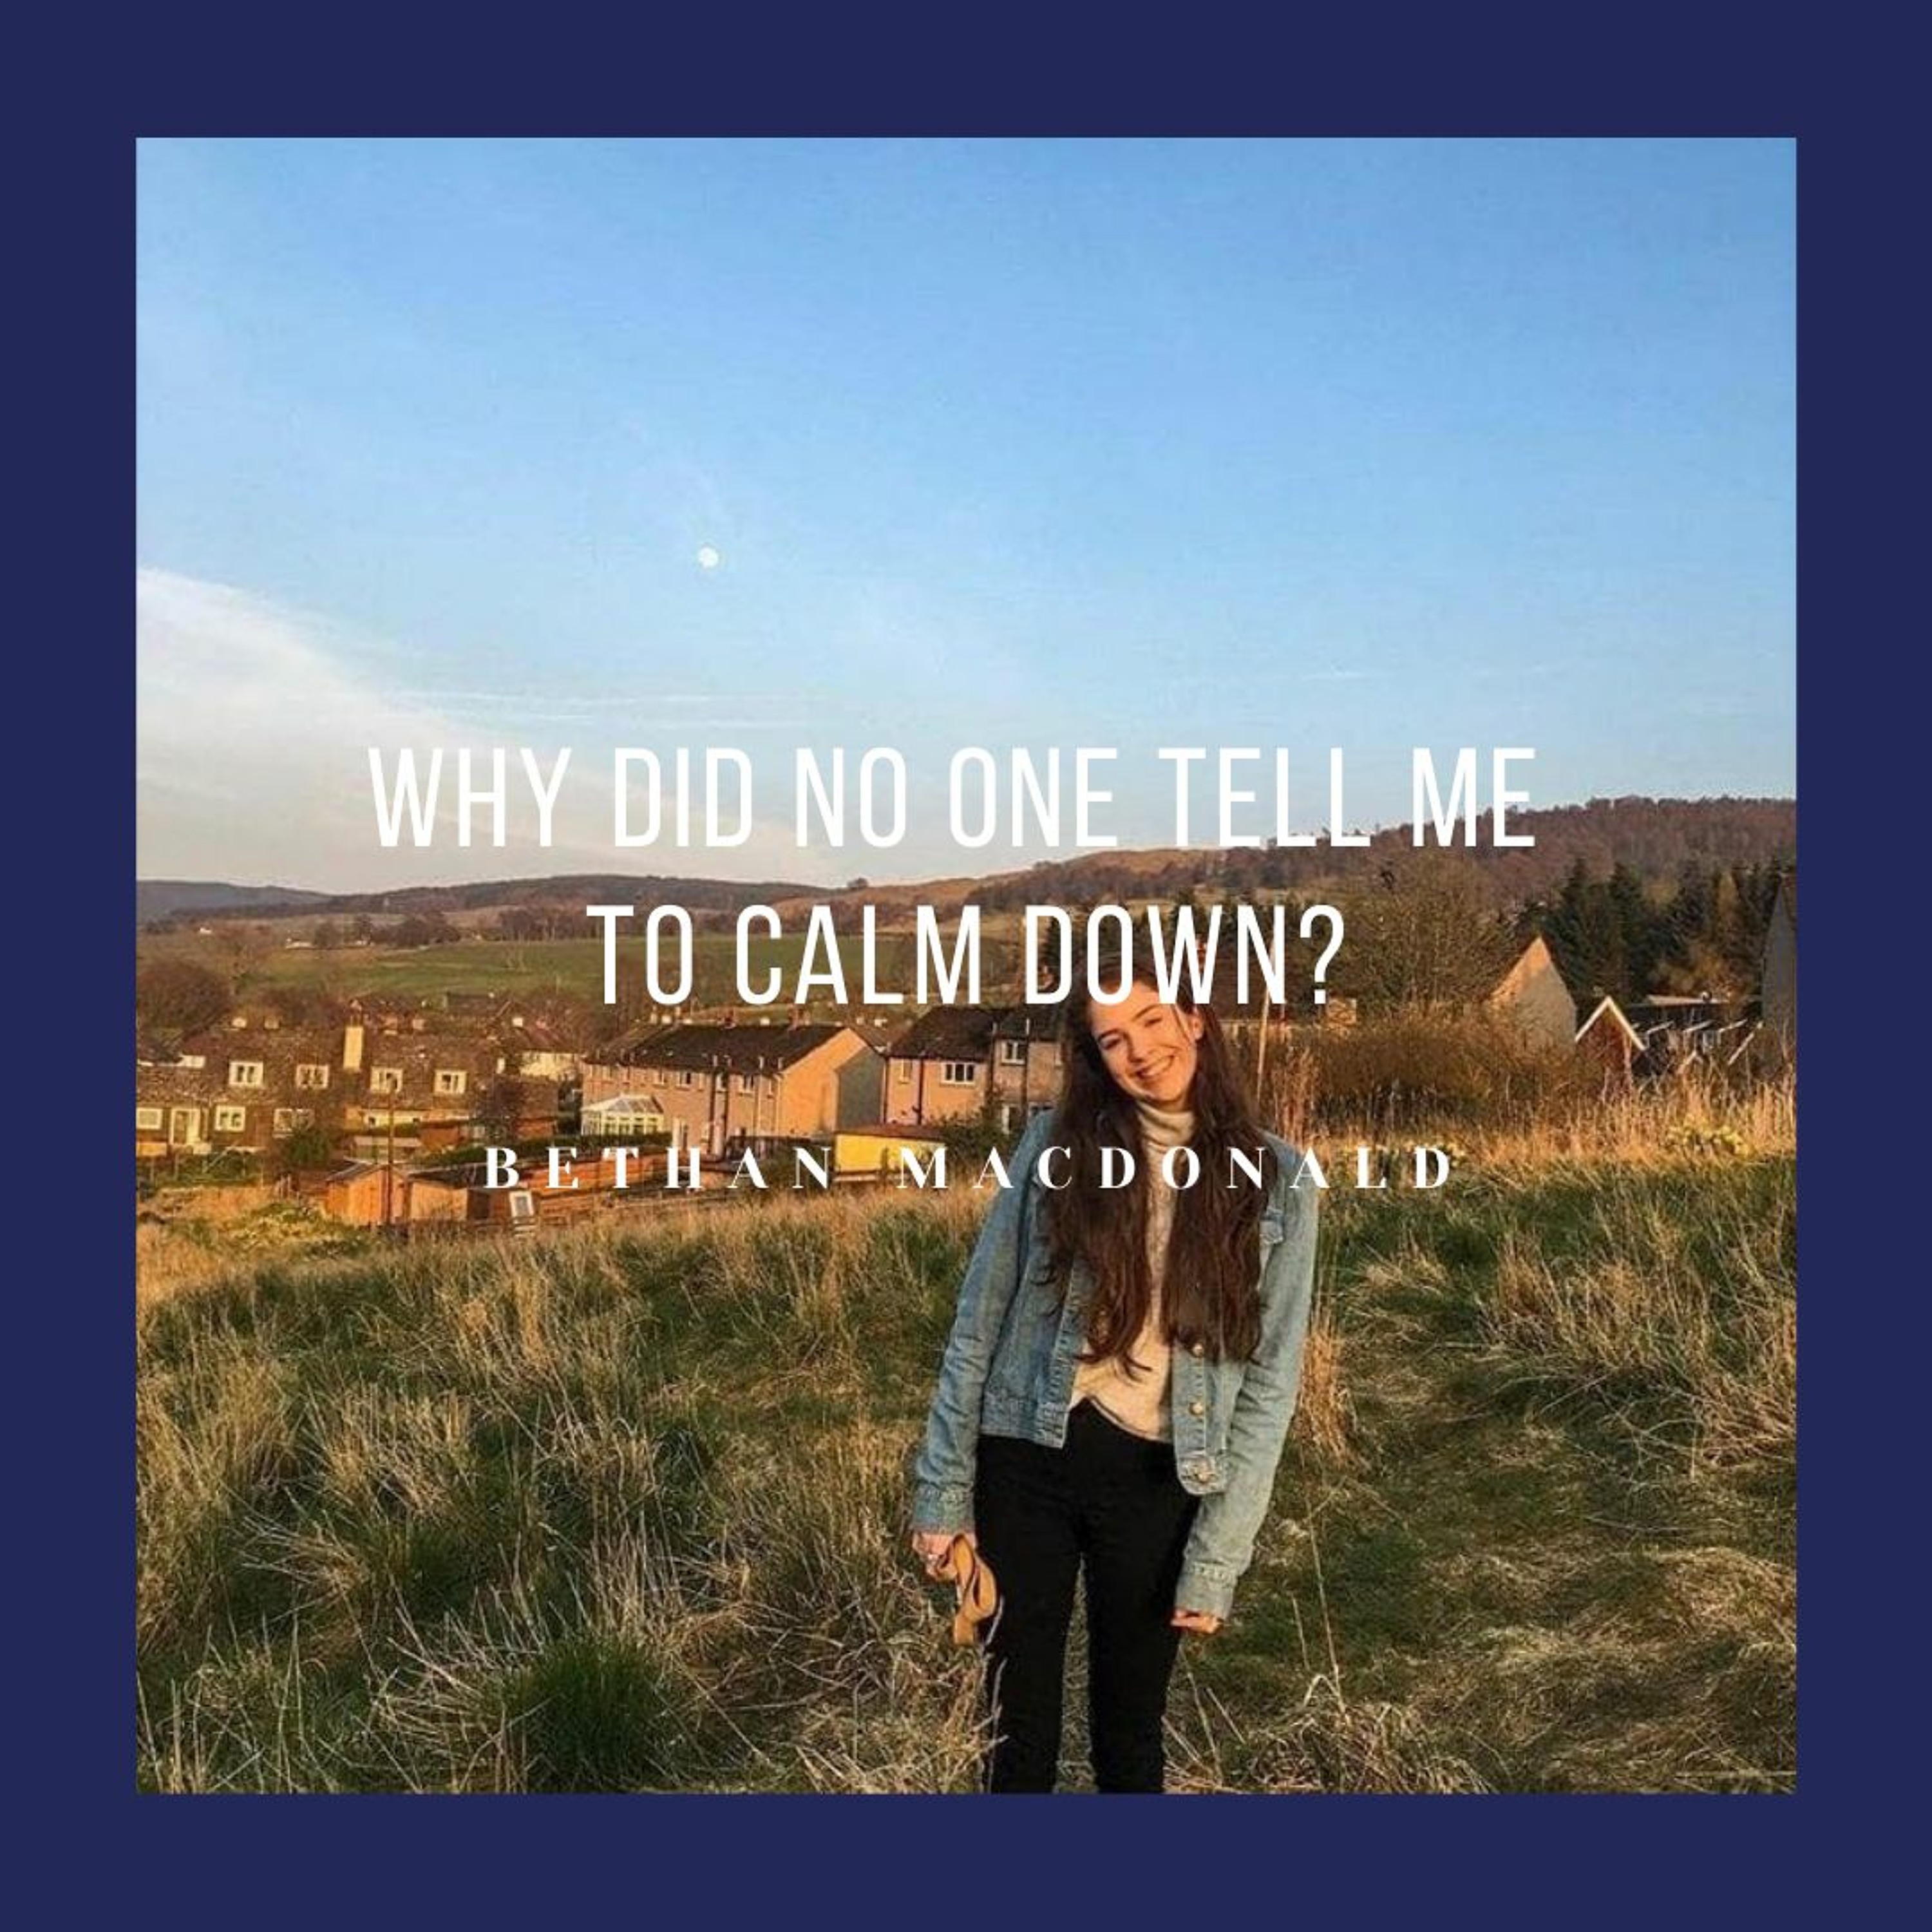 #8 Why did no one tell me to calm down?